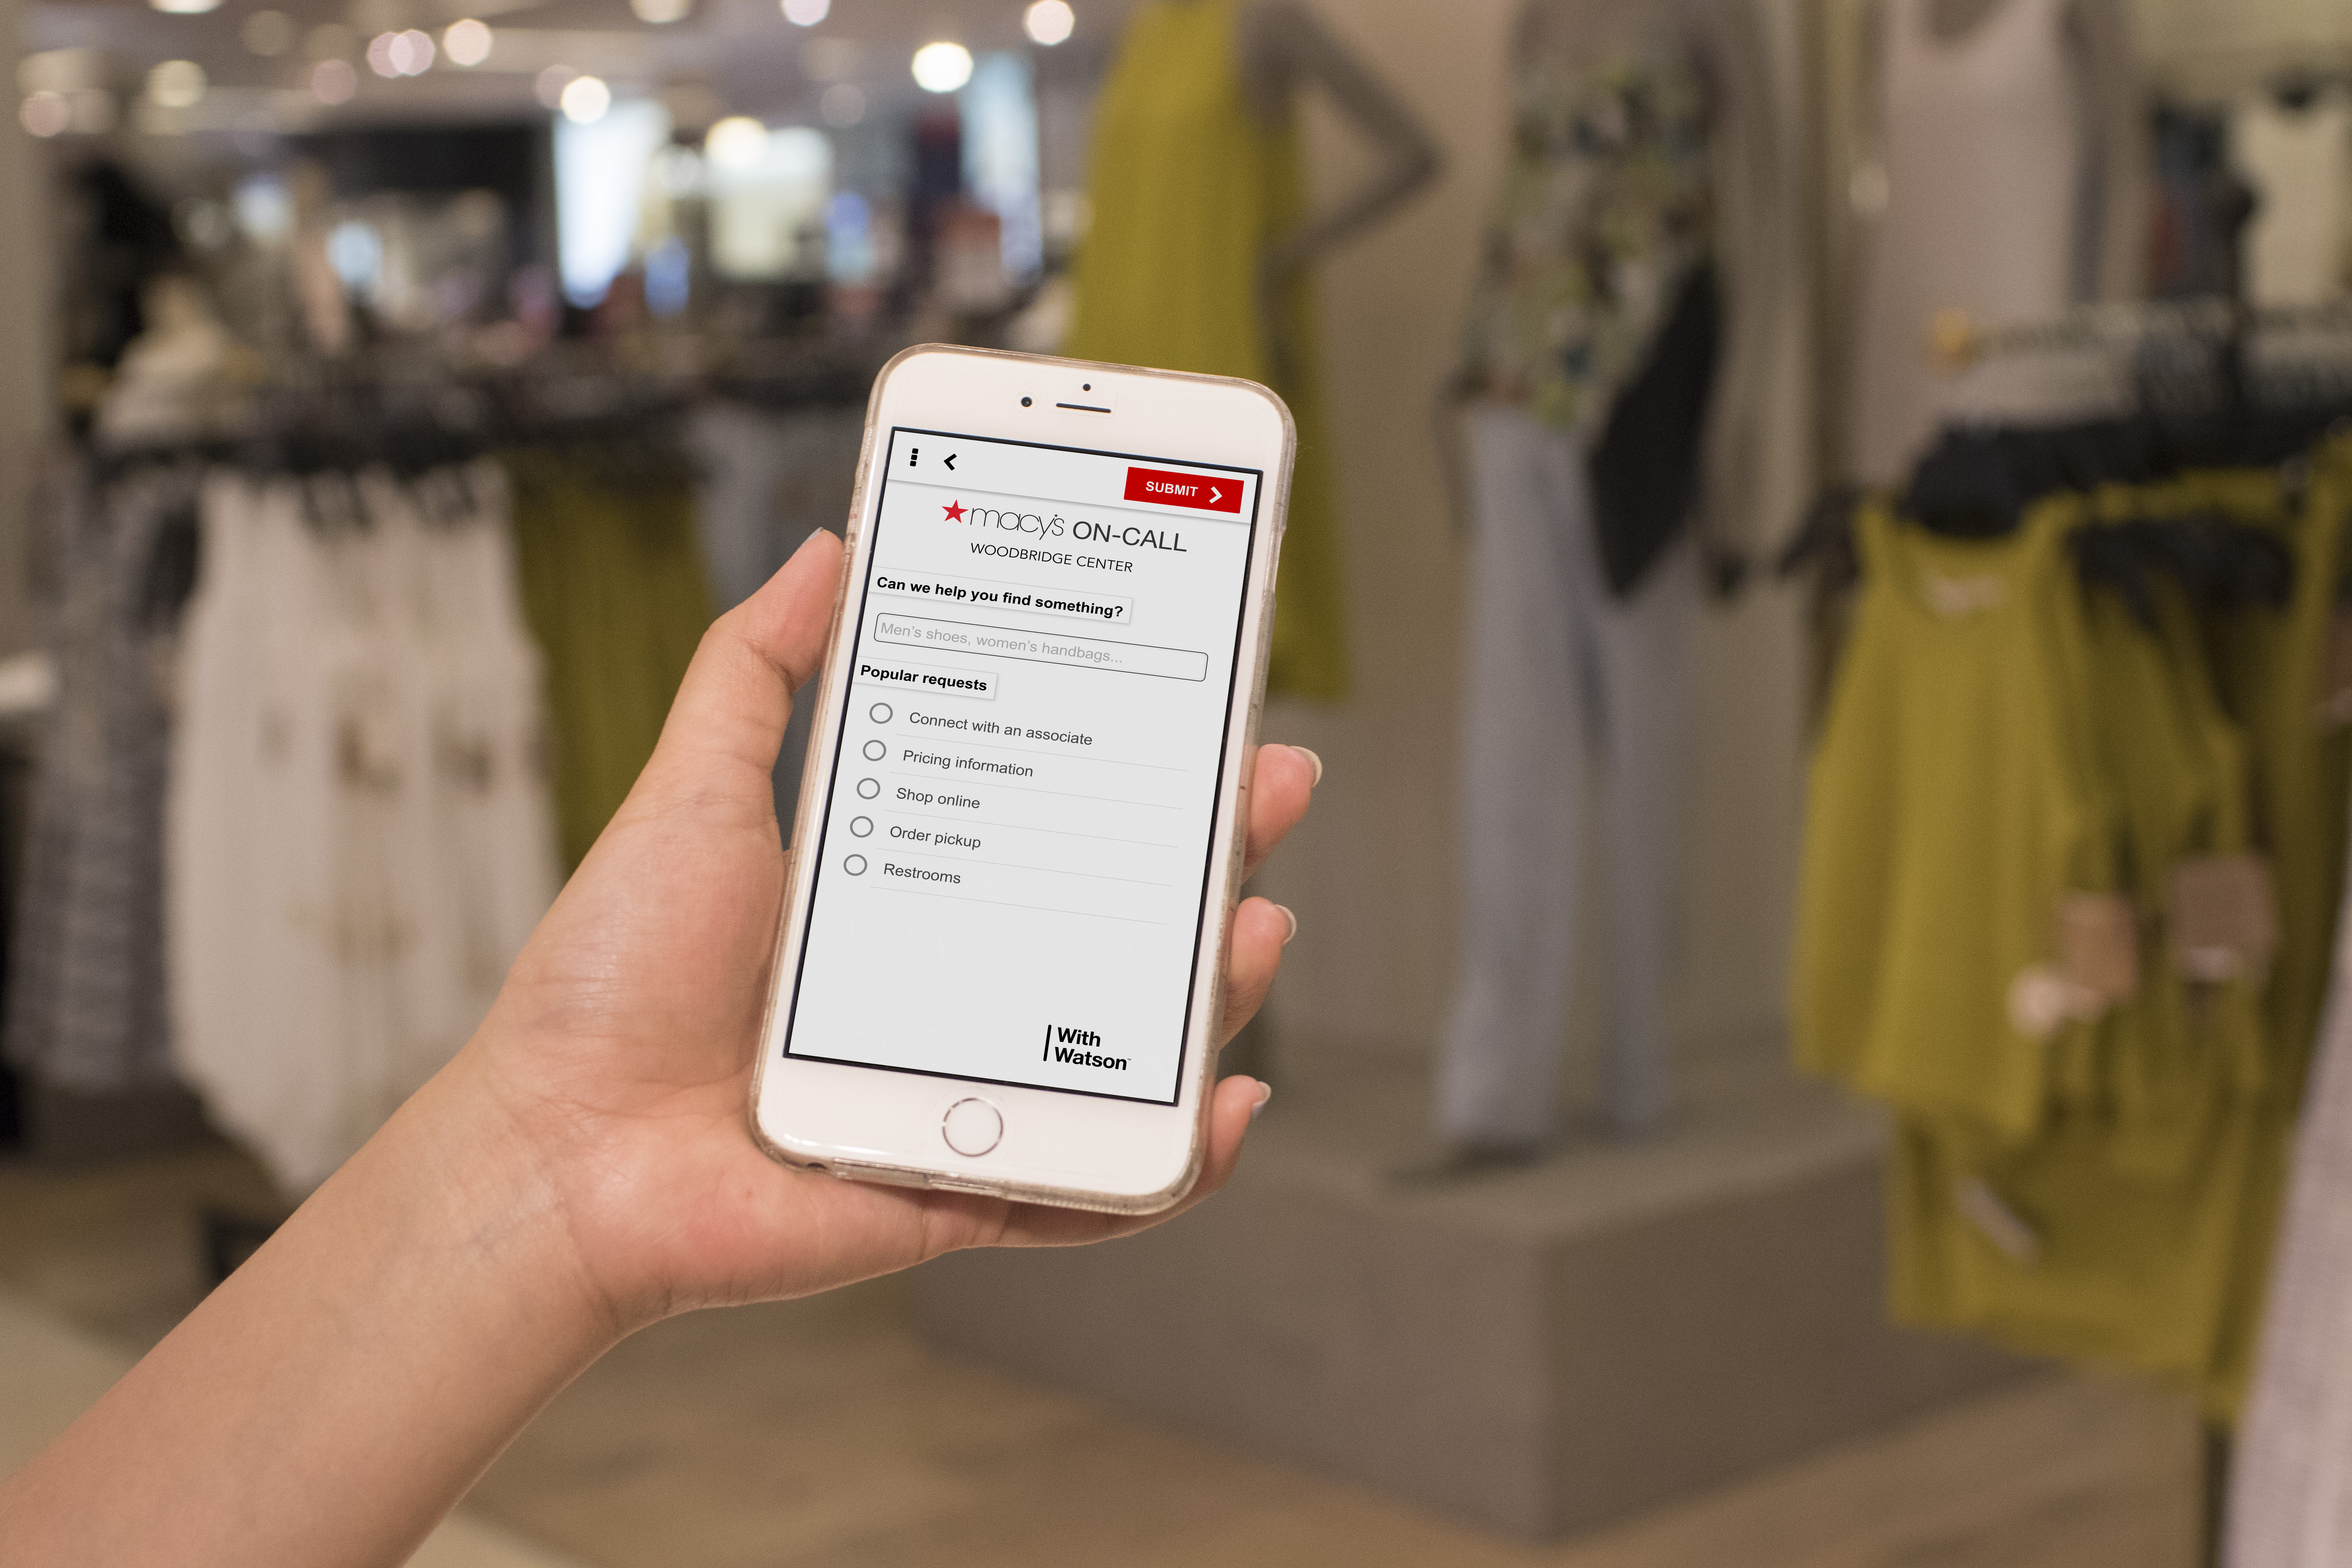 Macy’s New App Answers Questions You Used To Ask Store Employees